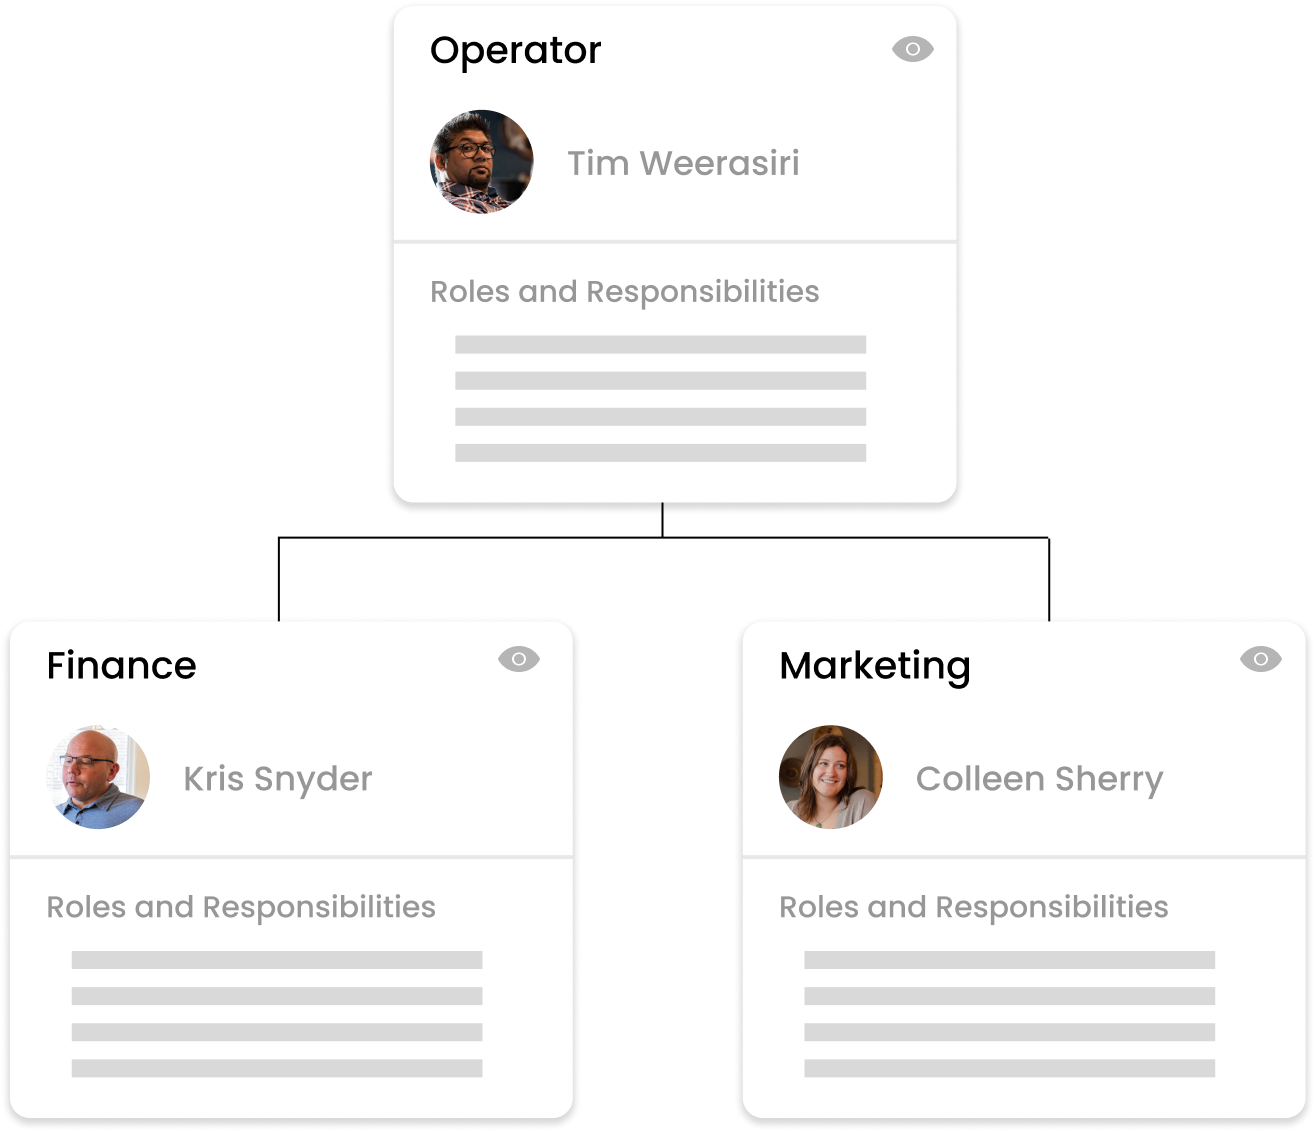 A screenshot of the Org Chart UI within the Ninety app. Operator at the top with Finance and Marketing roles underneath him in the tree.